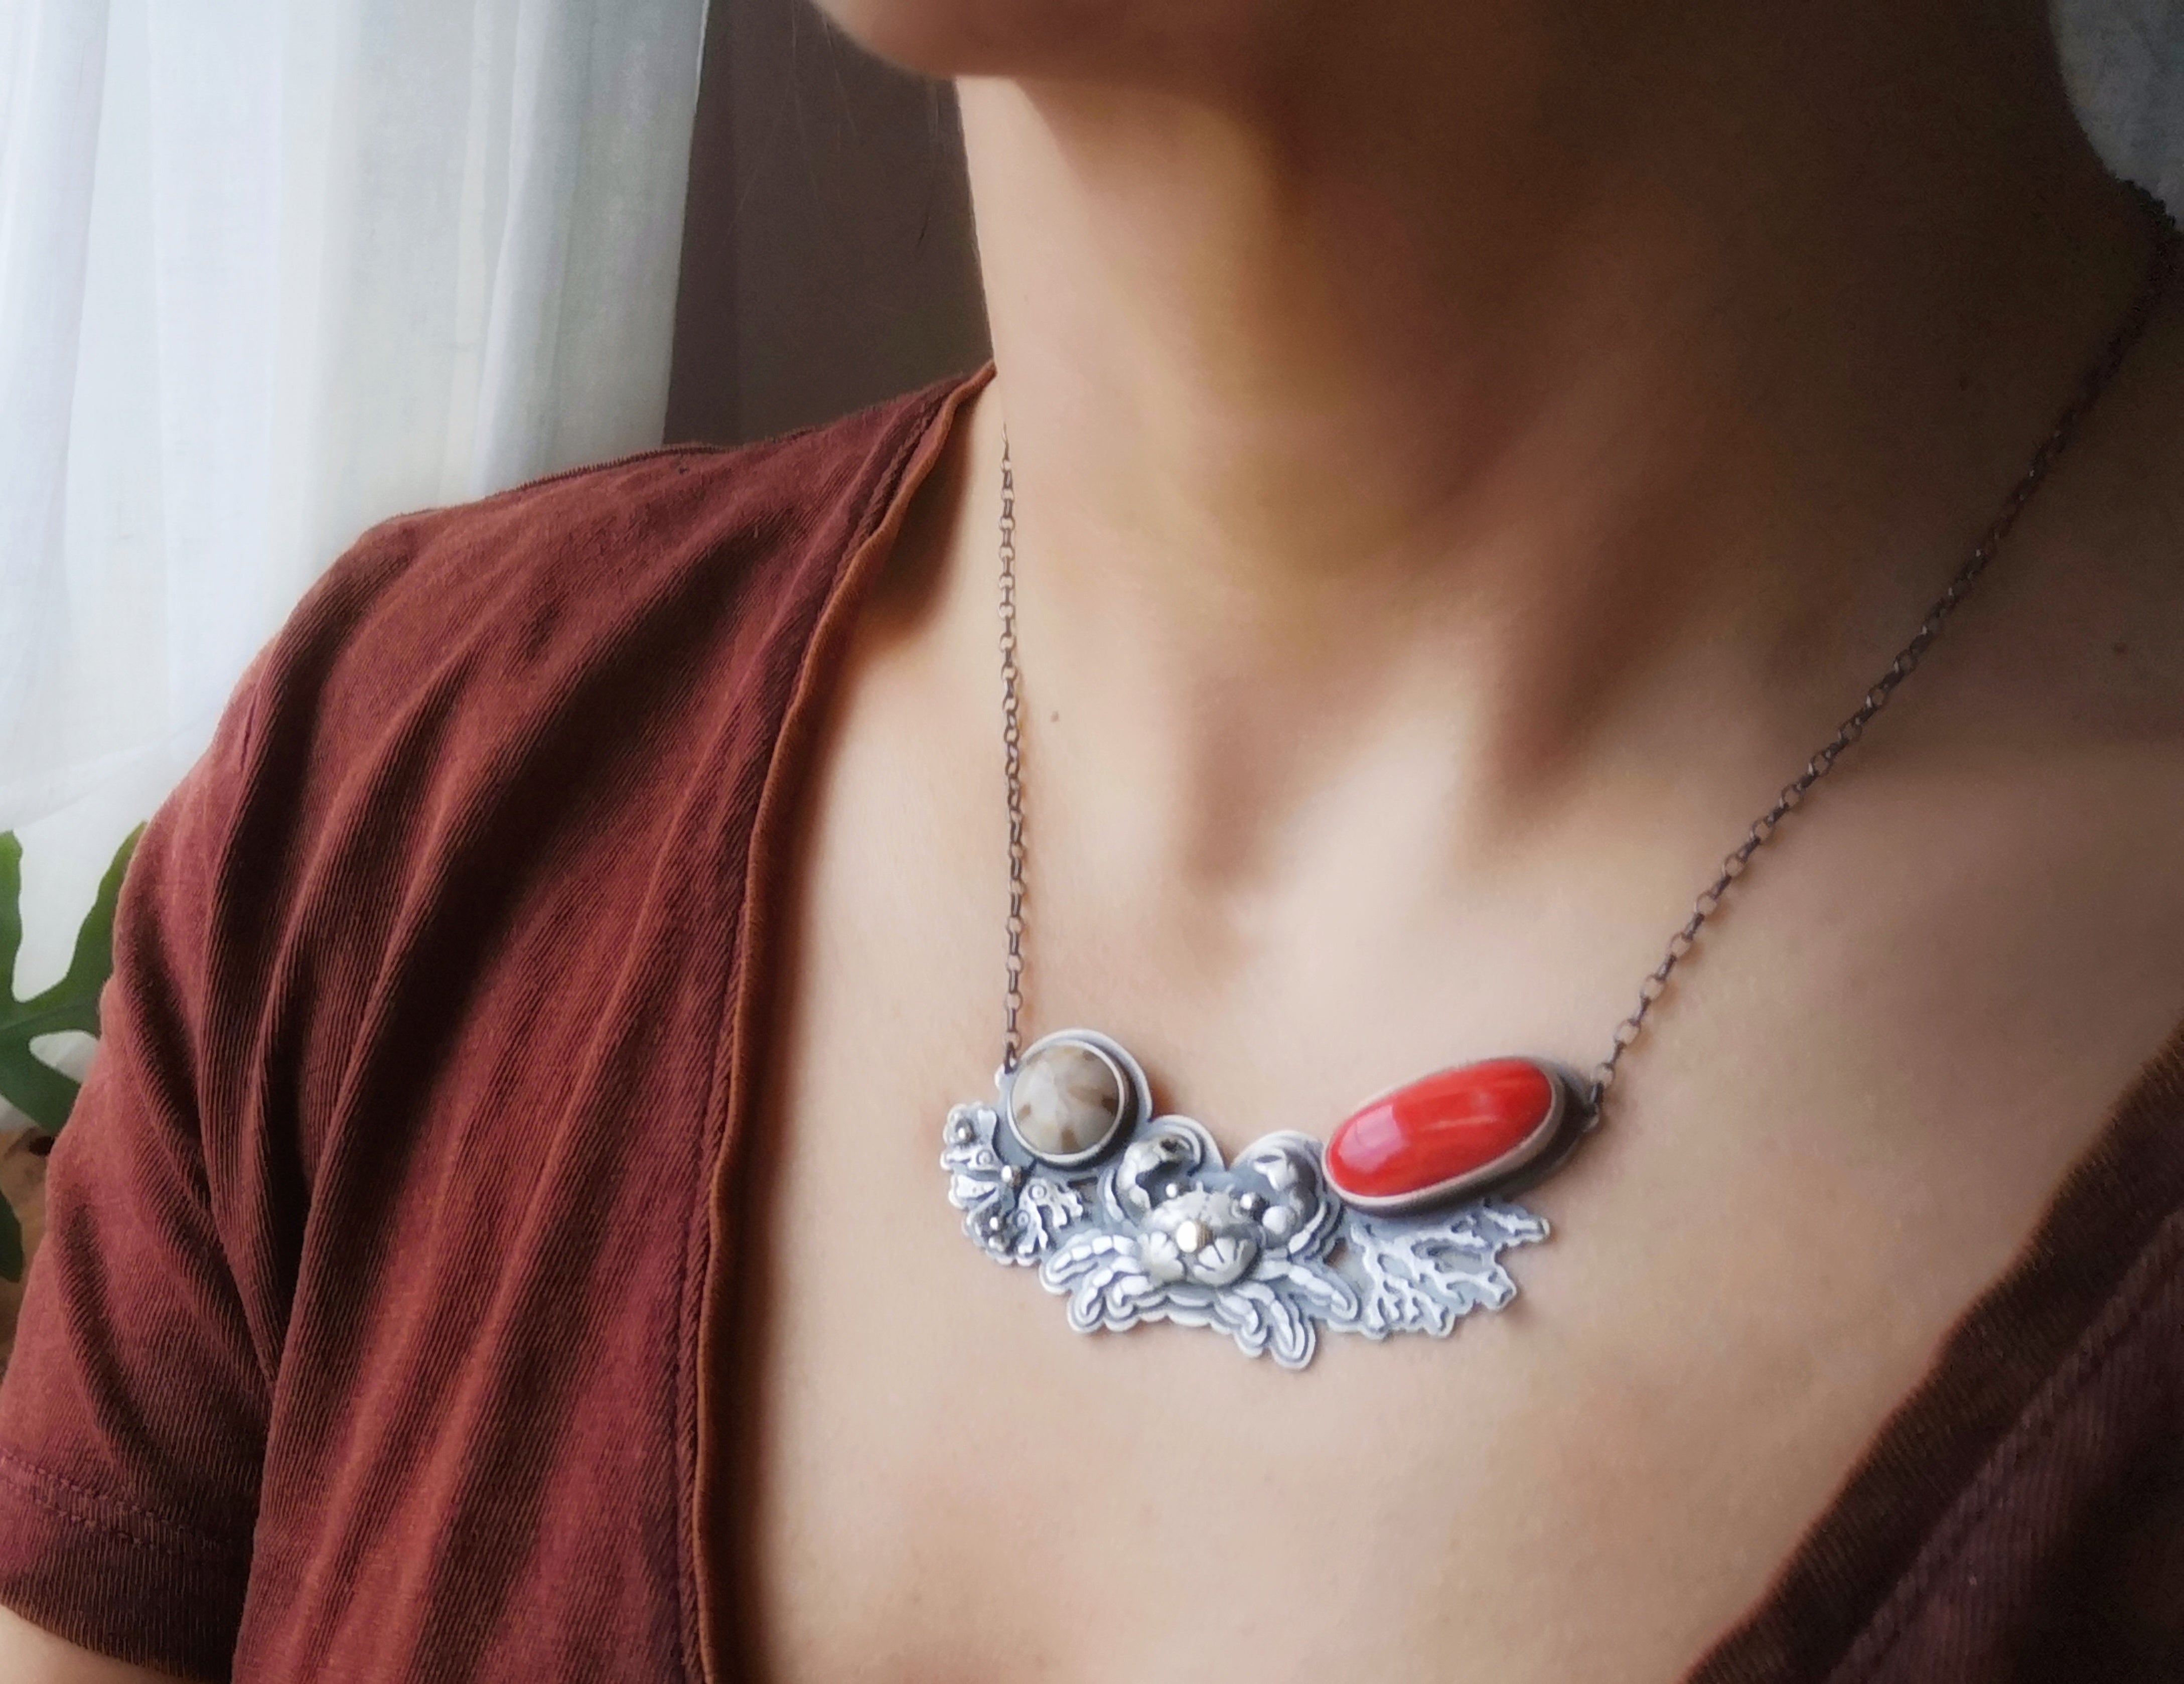 The Crab Necklace I